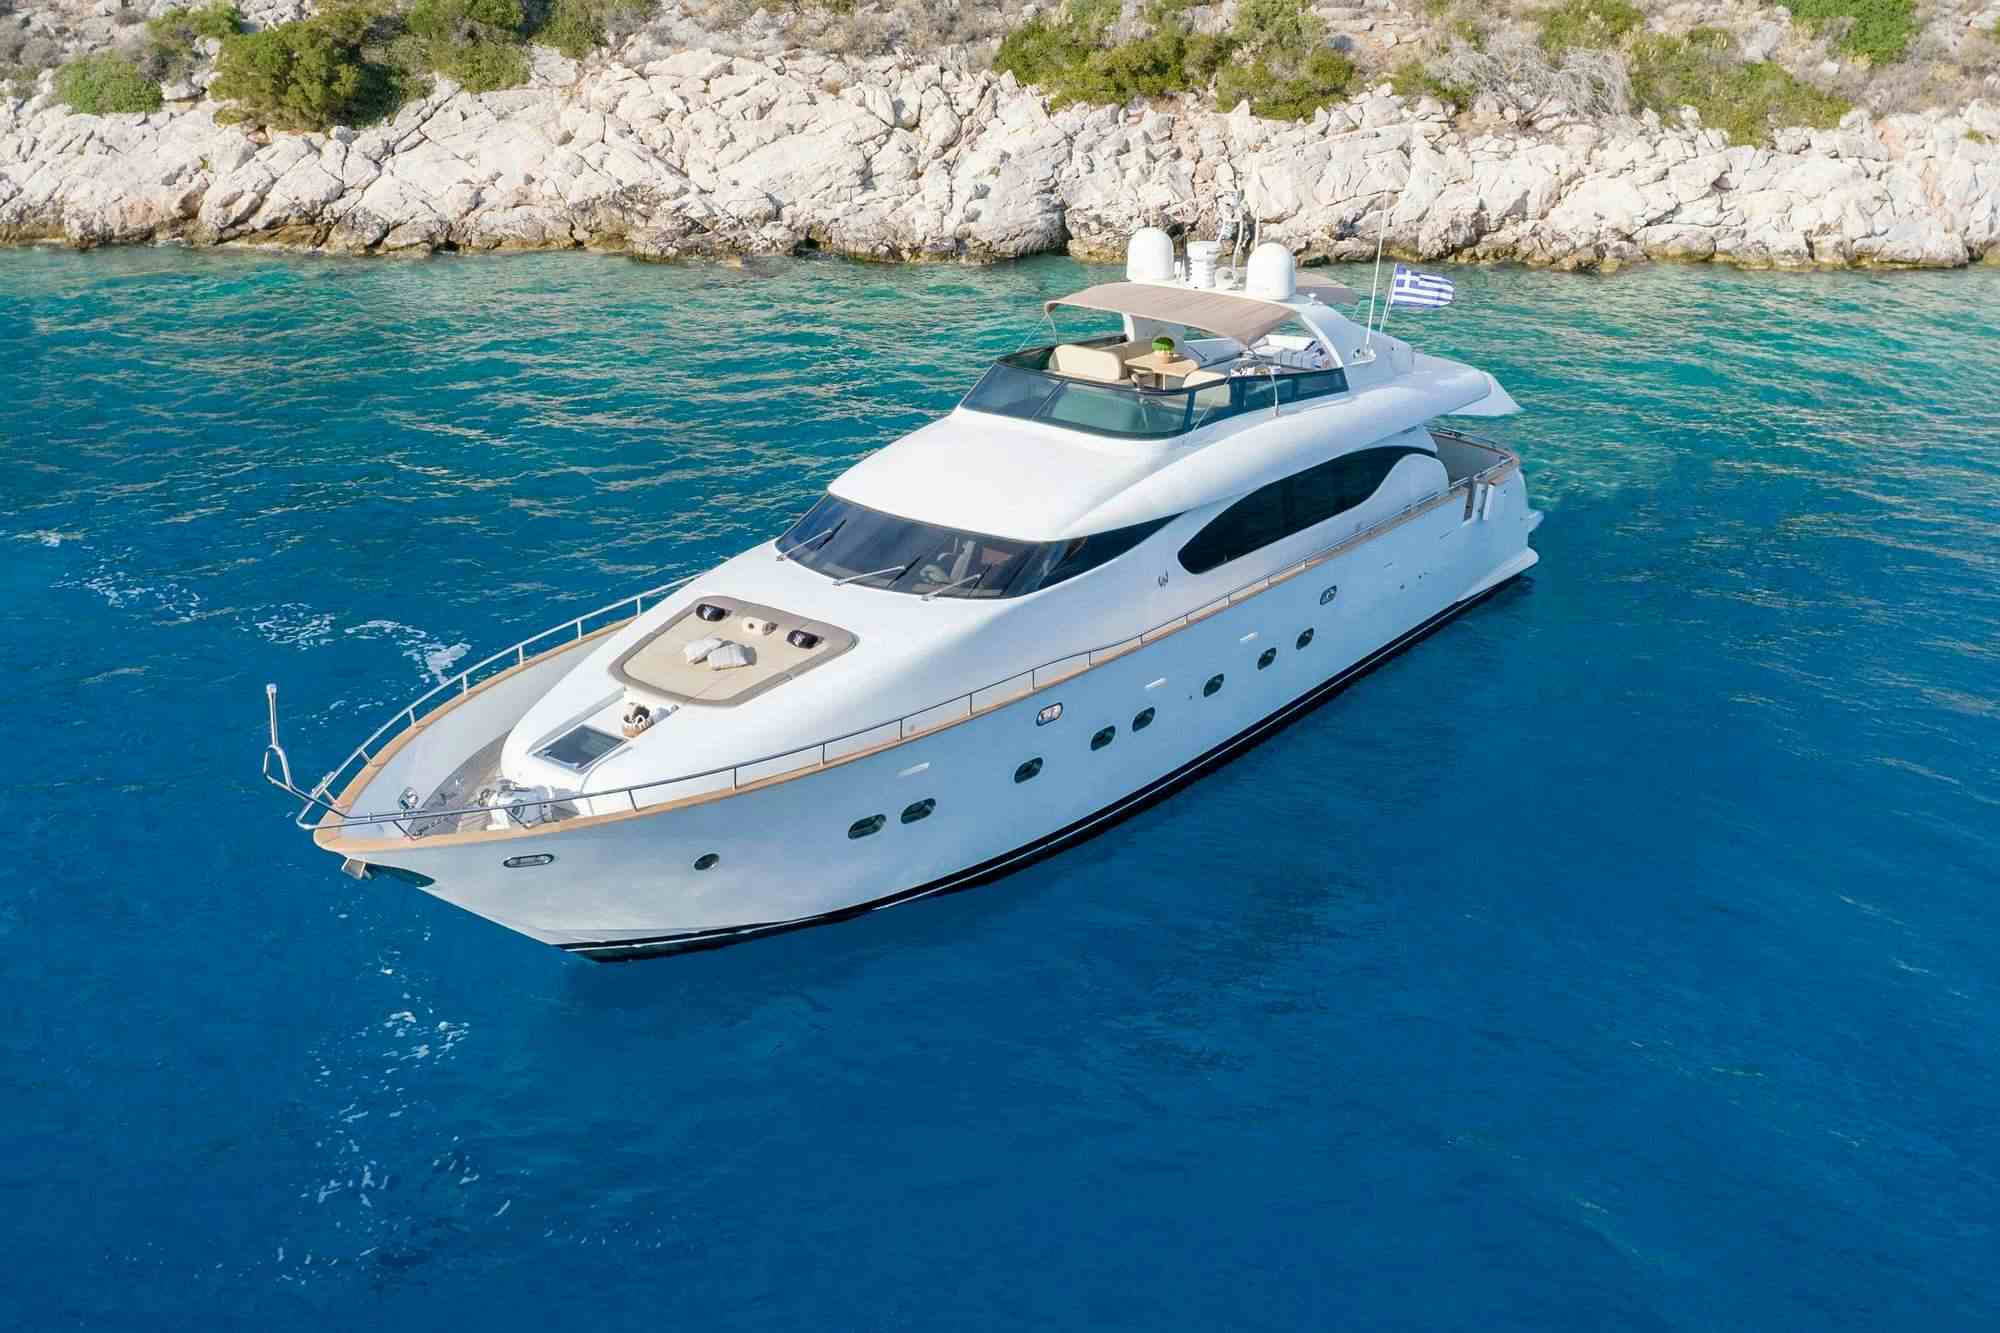 COOKIE - Yacht Charter Rhodes & Boat hire in Greece 1